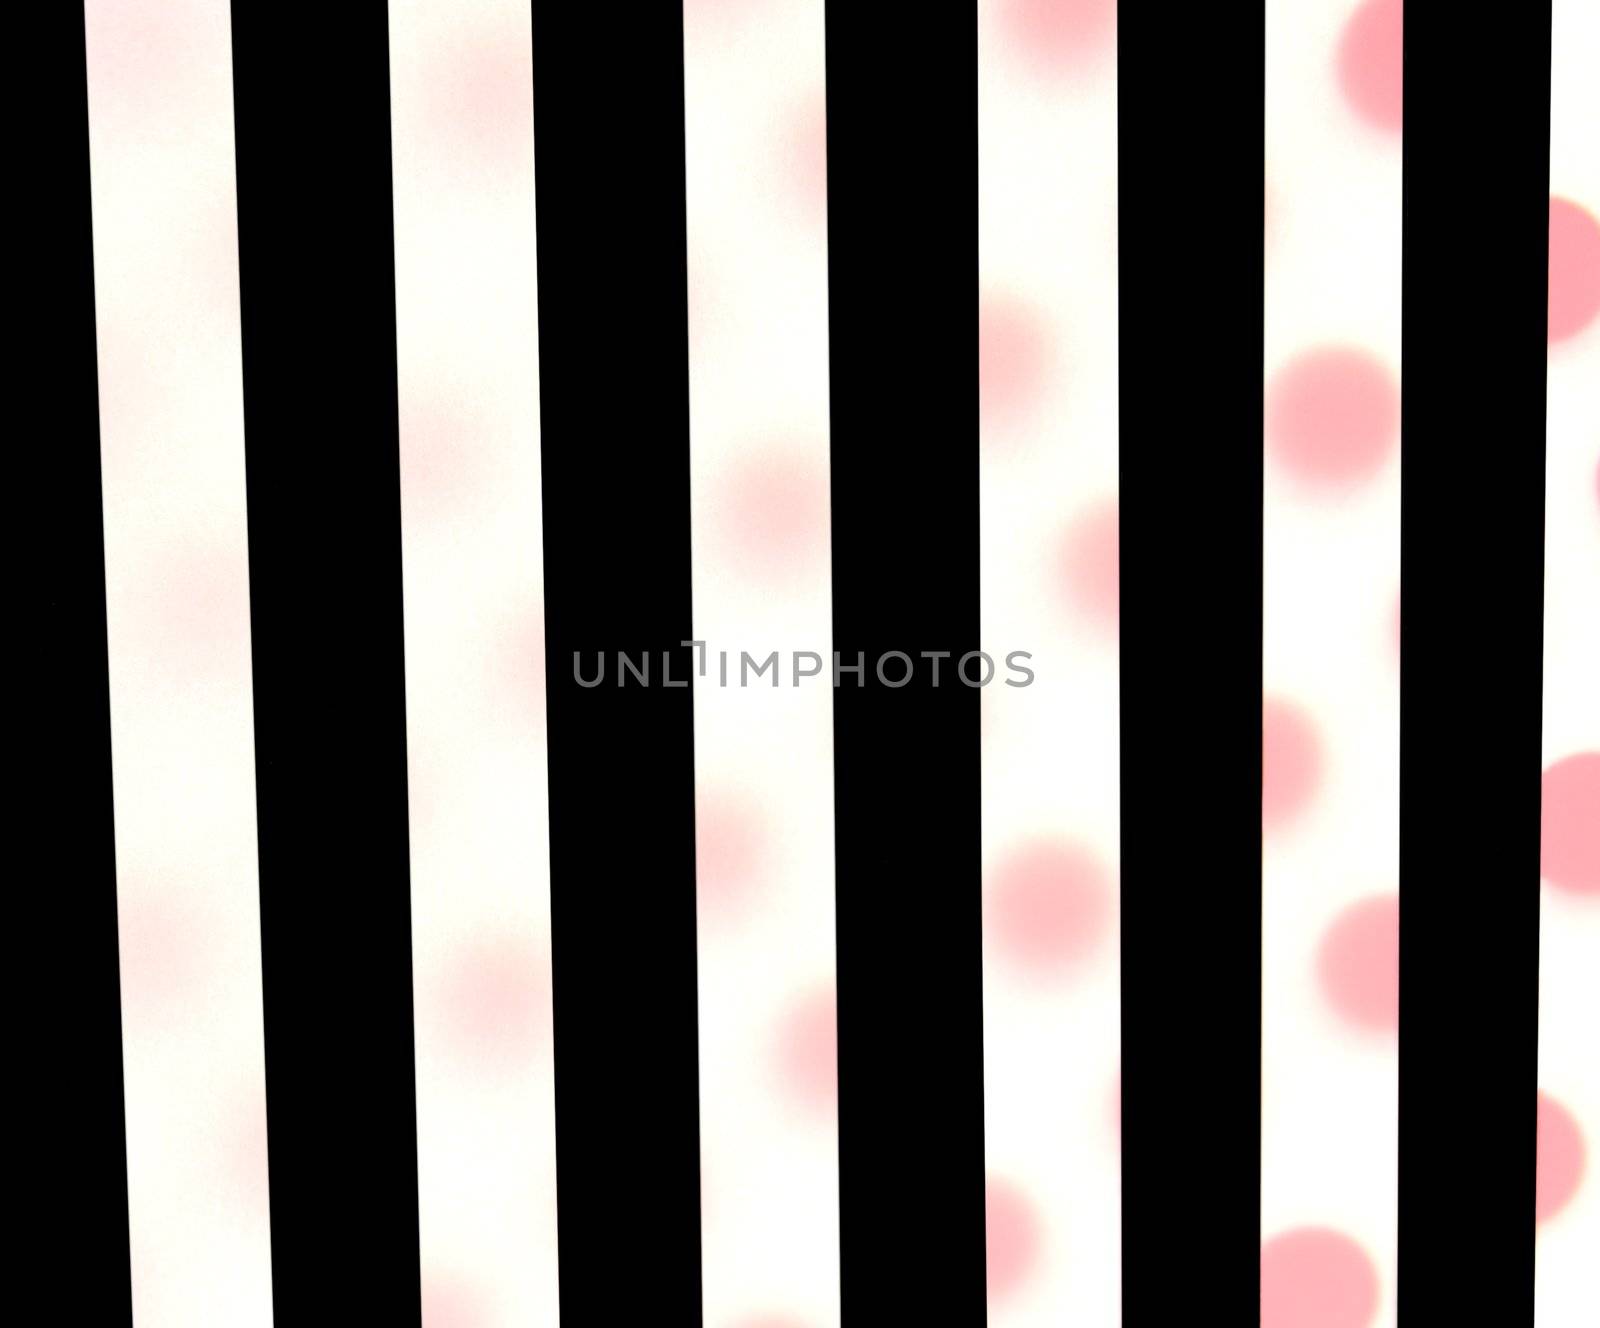 black and white vertical stripes over translucent red dots